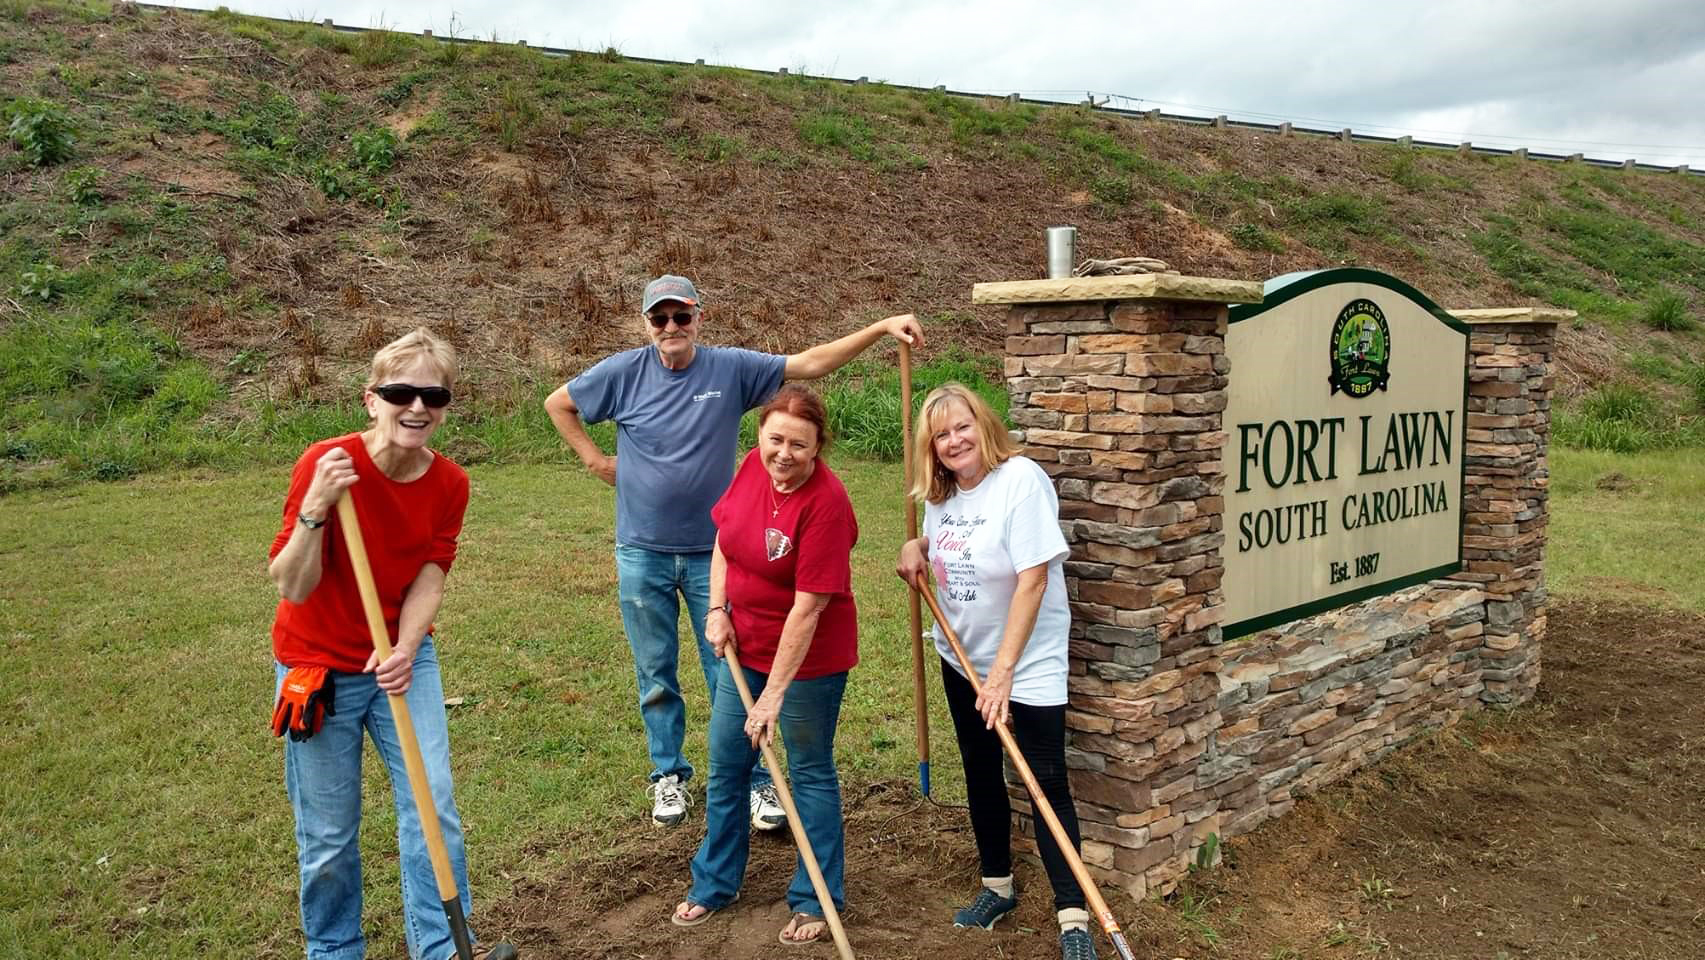 Community members holding rakes and shovels pose in front of Fort Lawn, South Carolina town sign.